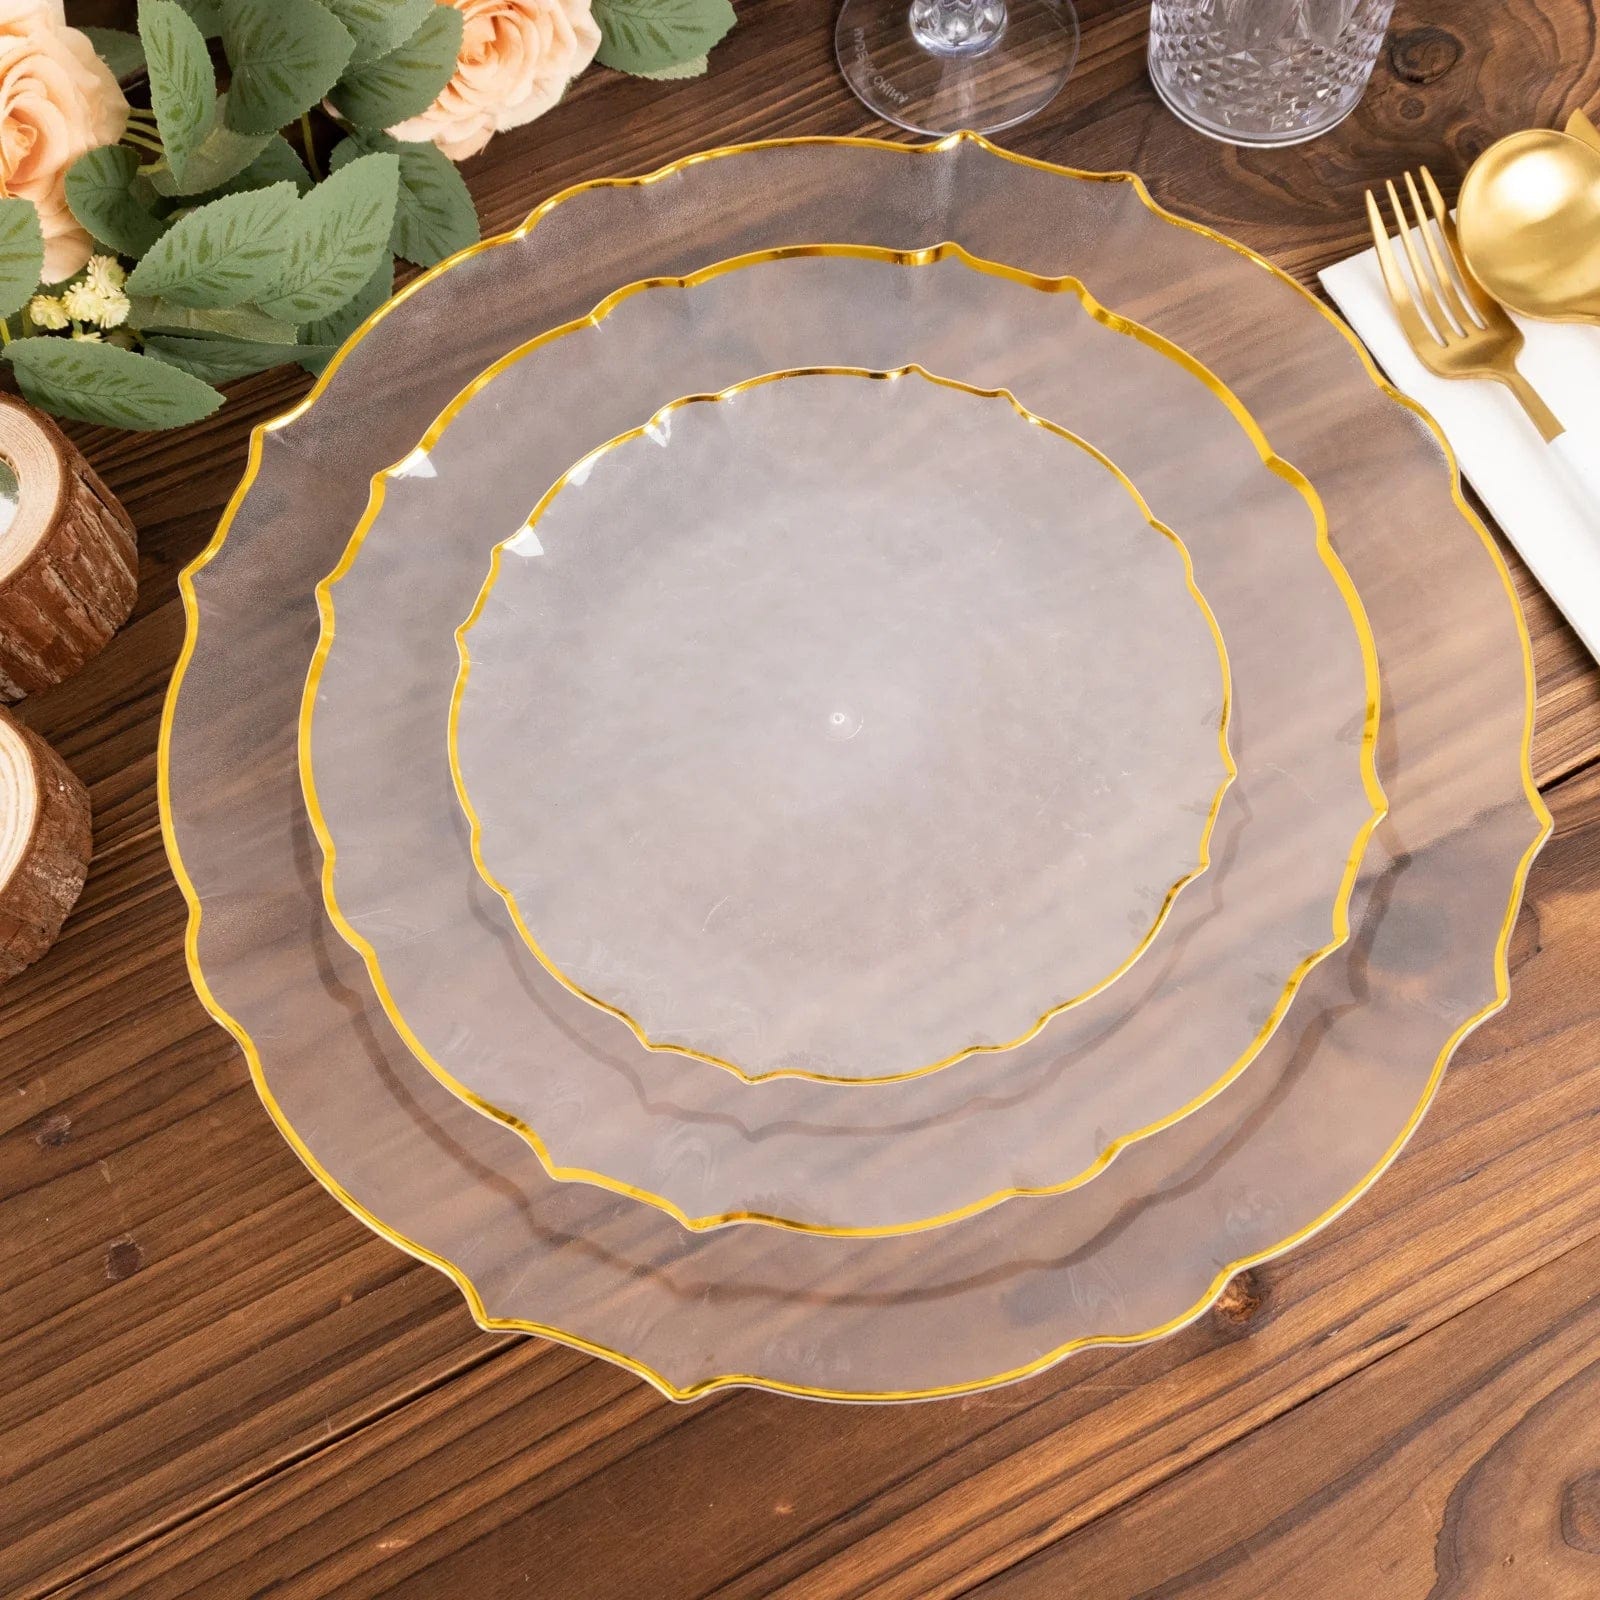 6 Clear 13 in Round Plastic Charger Plates with Gold Scalloped Rim